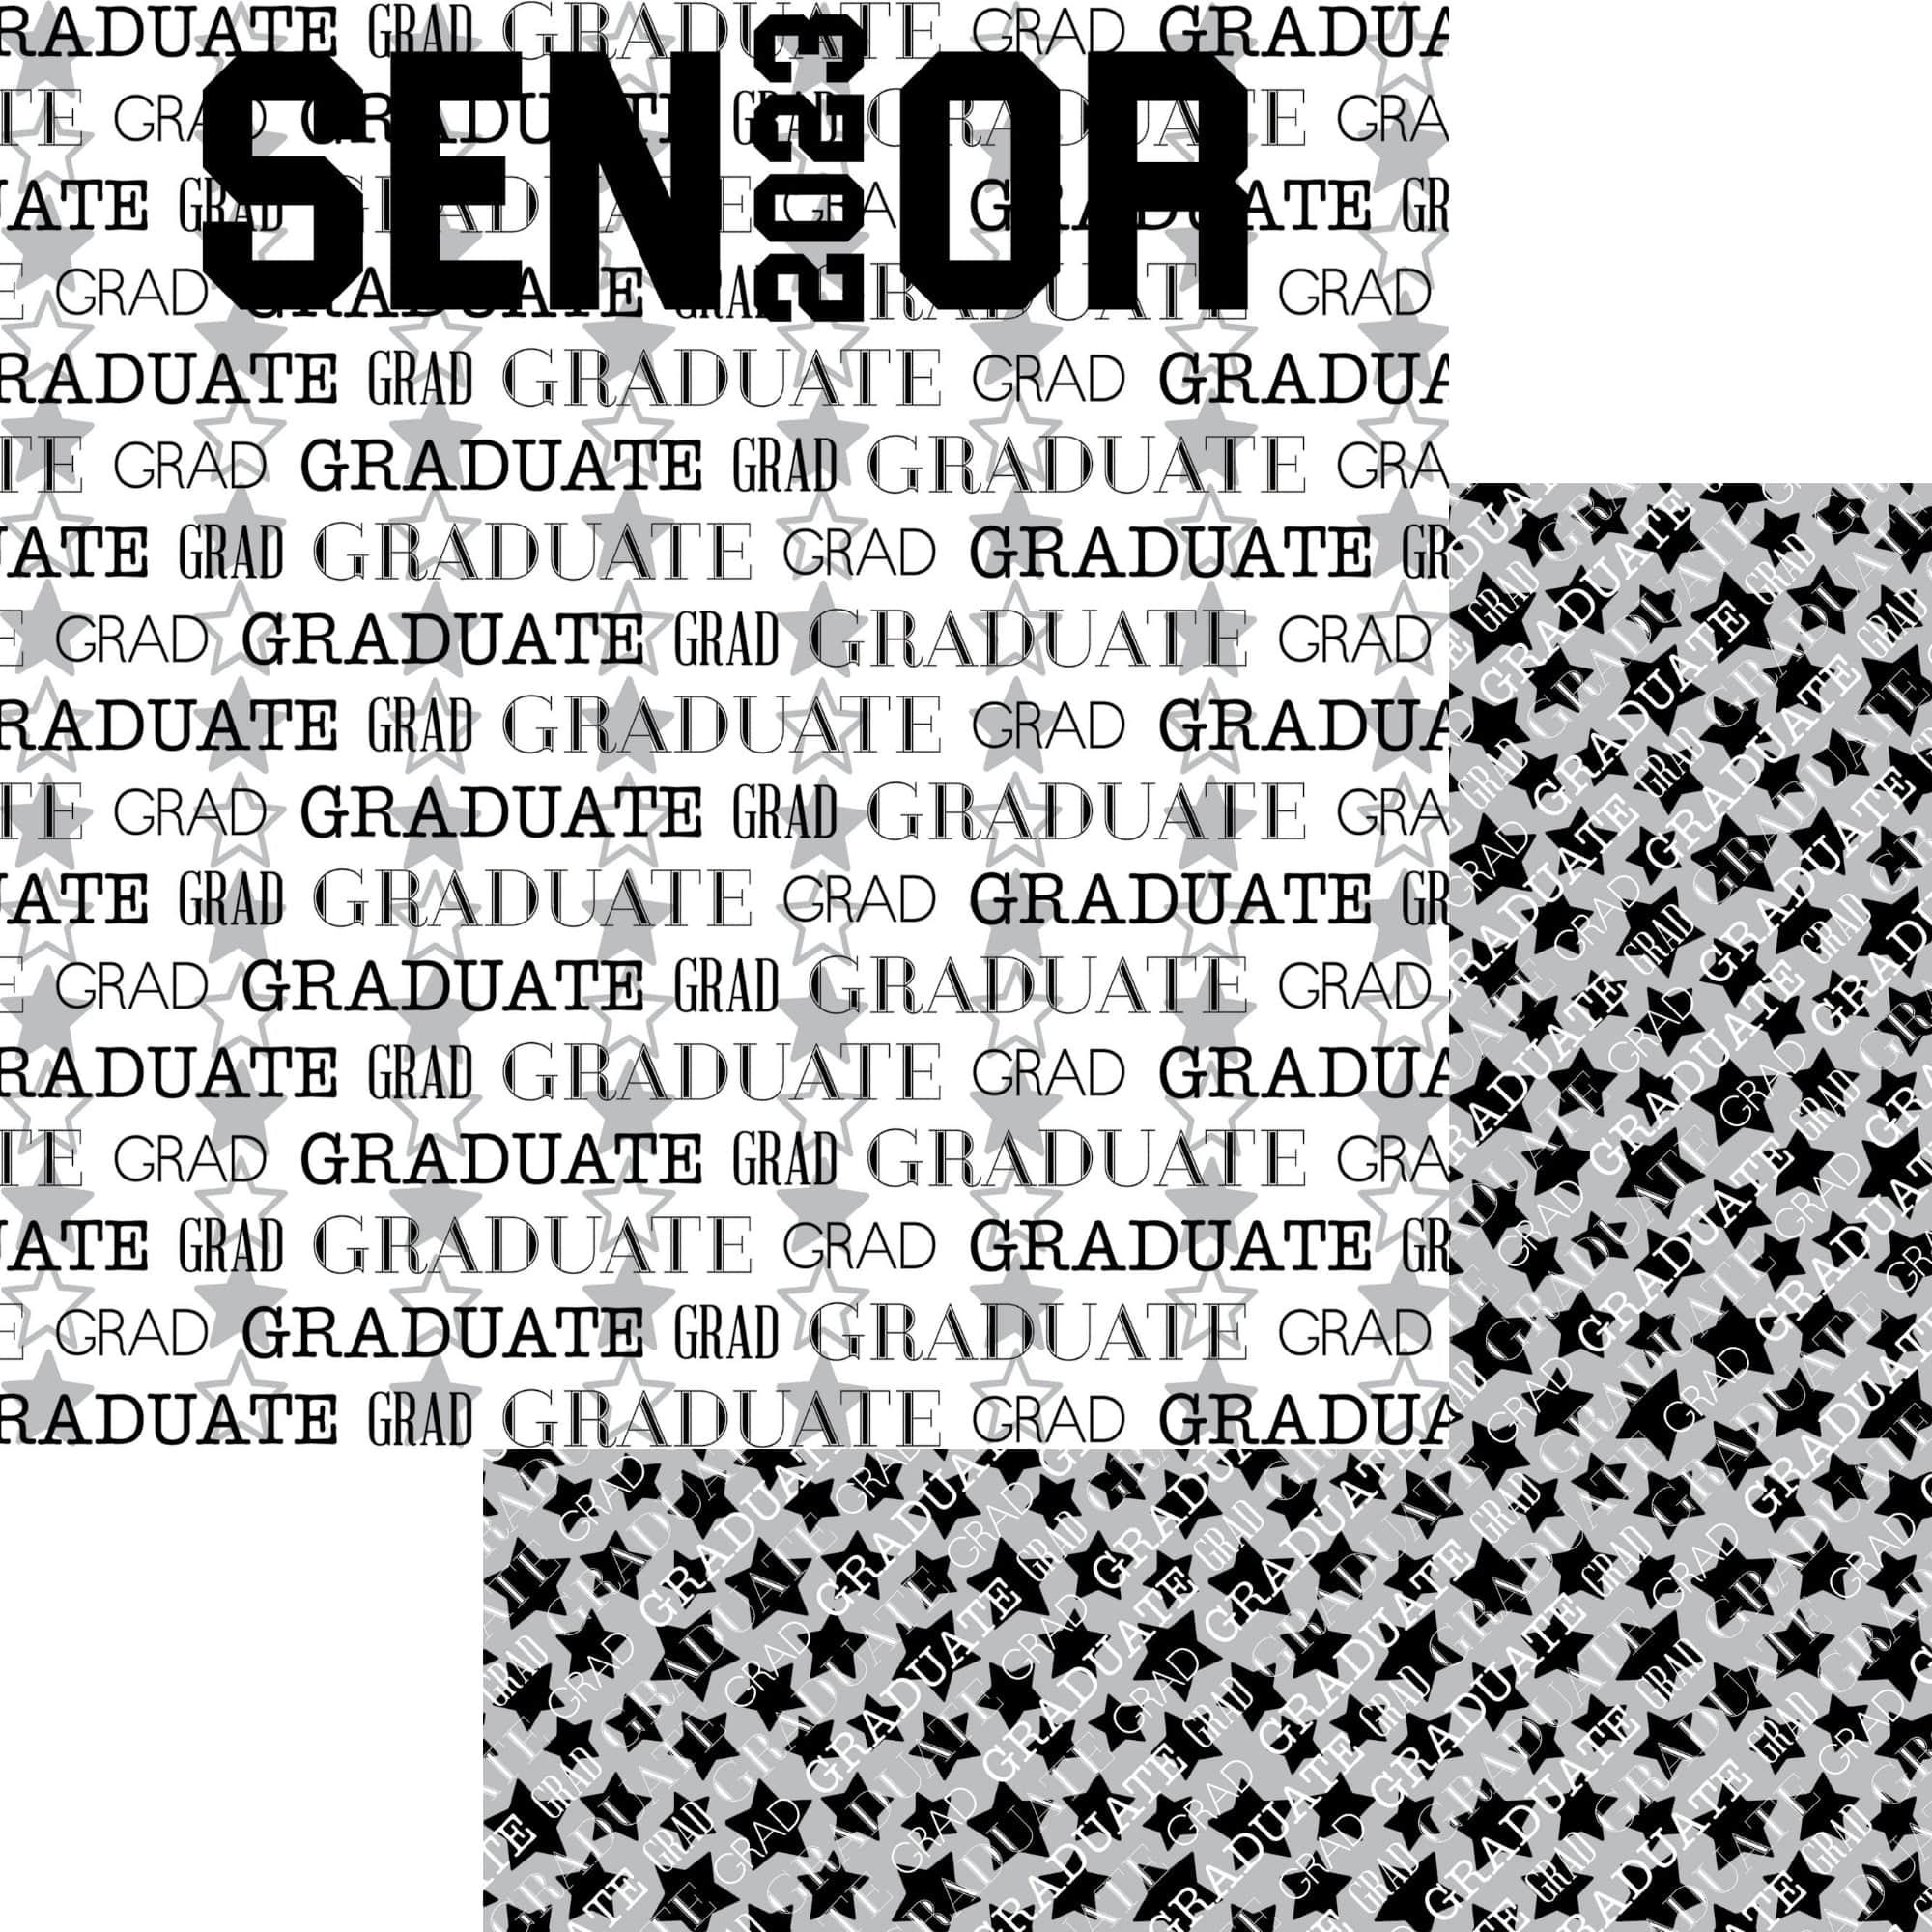 Graduate Collection 2023 Senior 12 x 12 Double-Sided Scrapbook Paper by SSC Designs